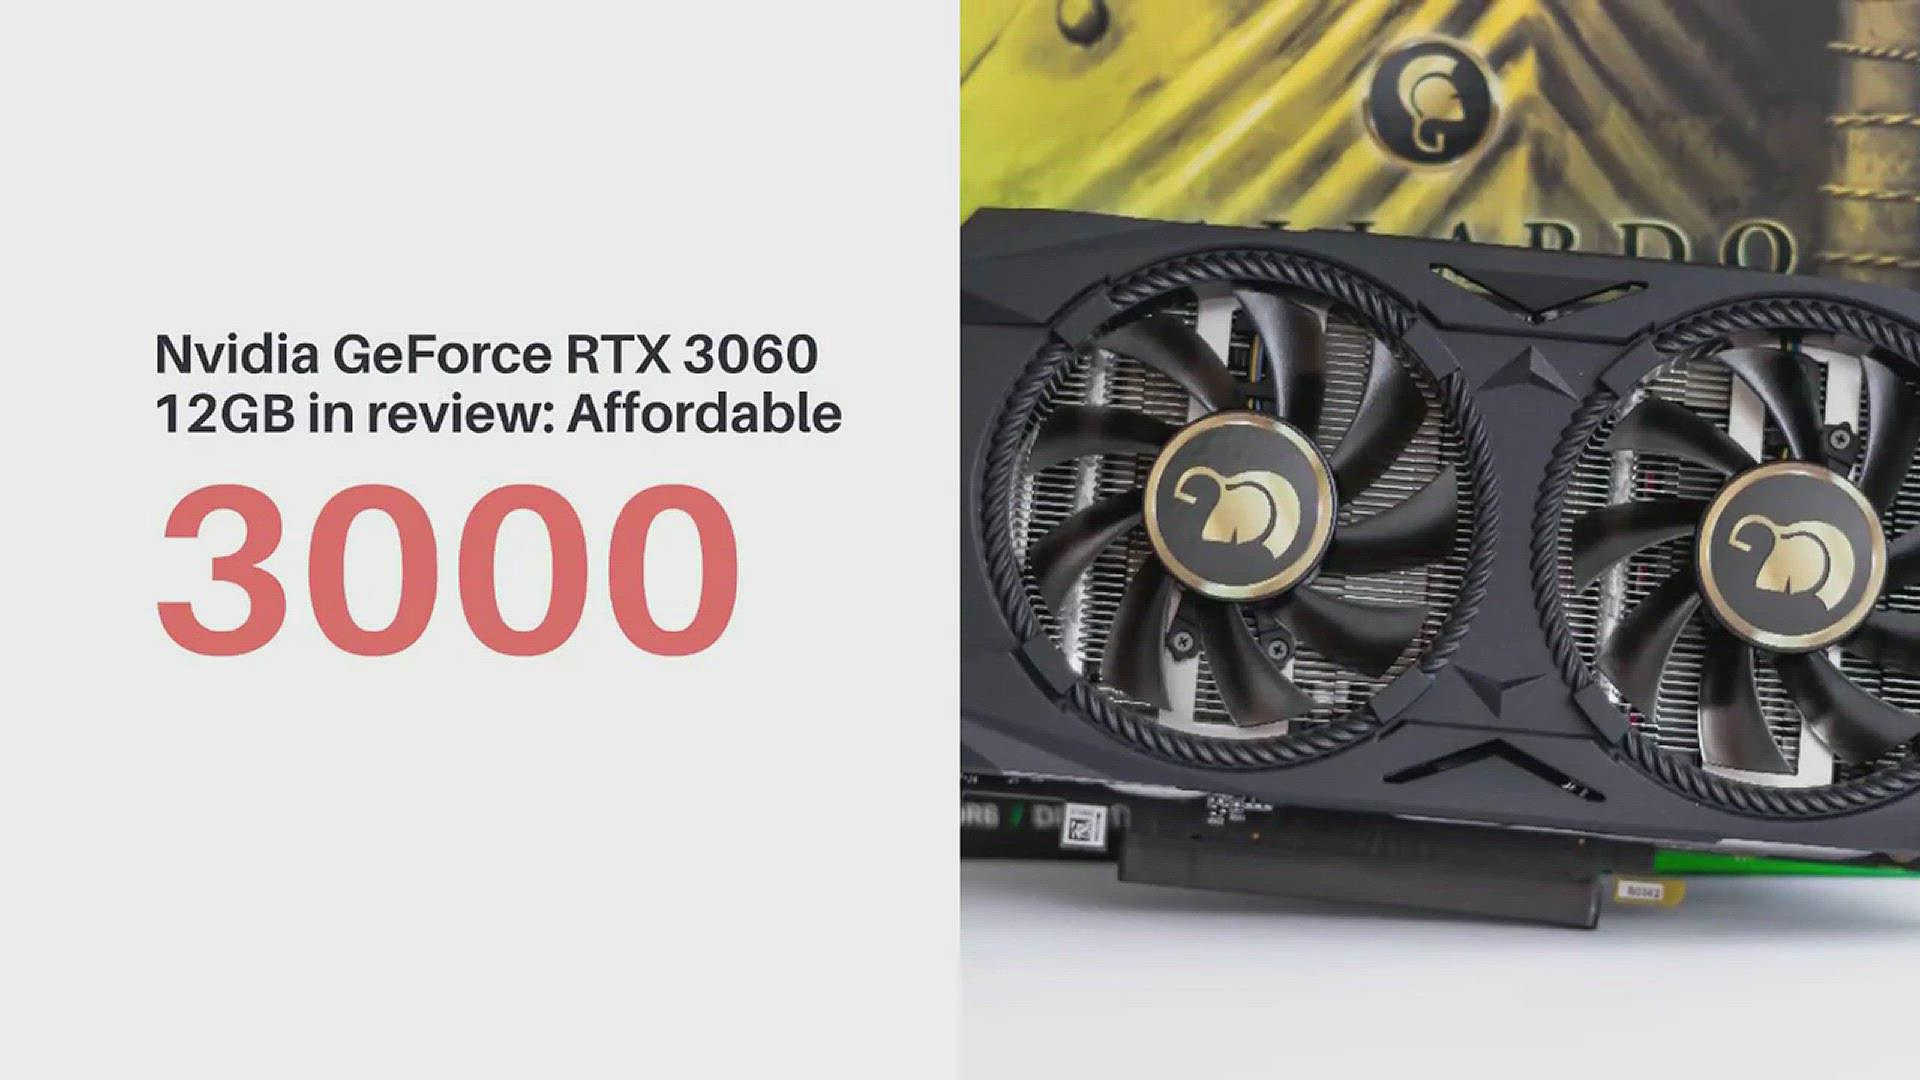 'Video thumbnail for Nvidia_GeForce_RTX_3060_12GB '